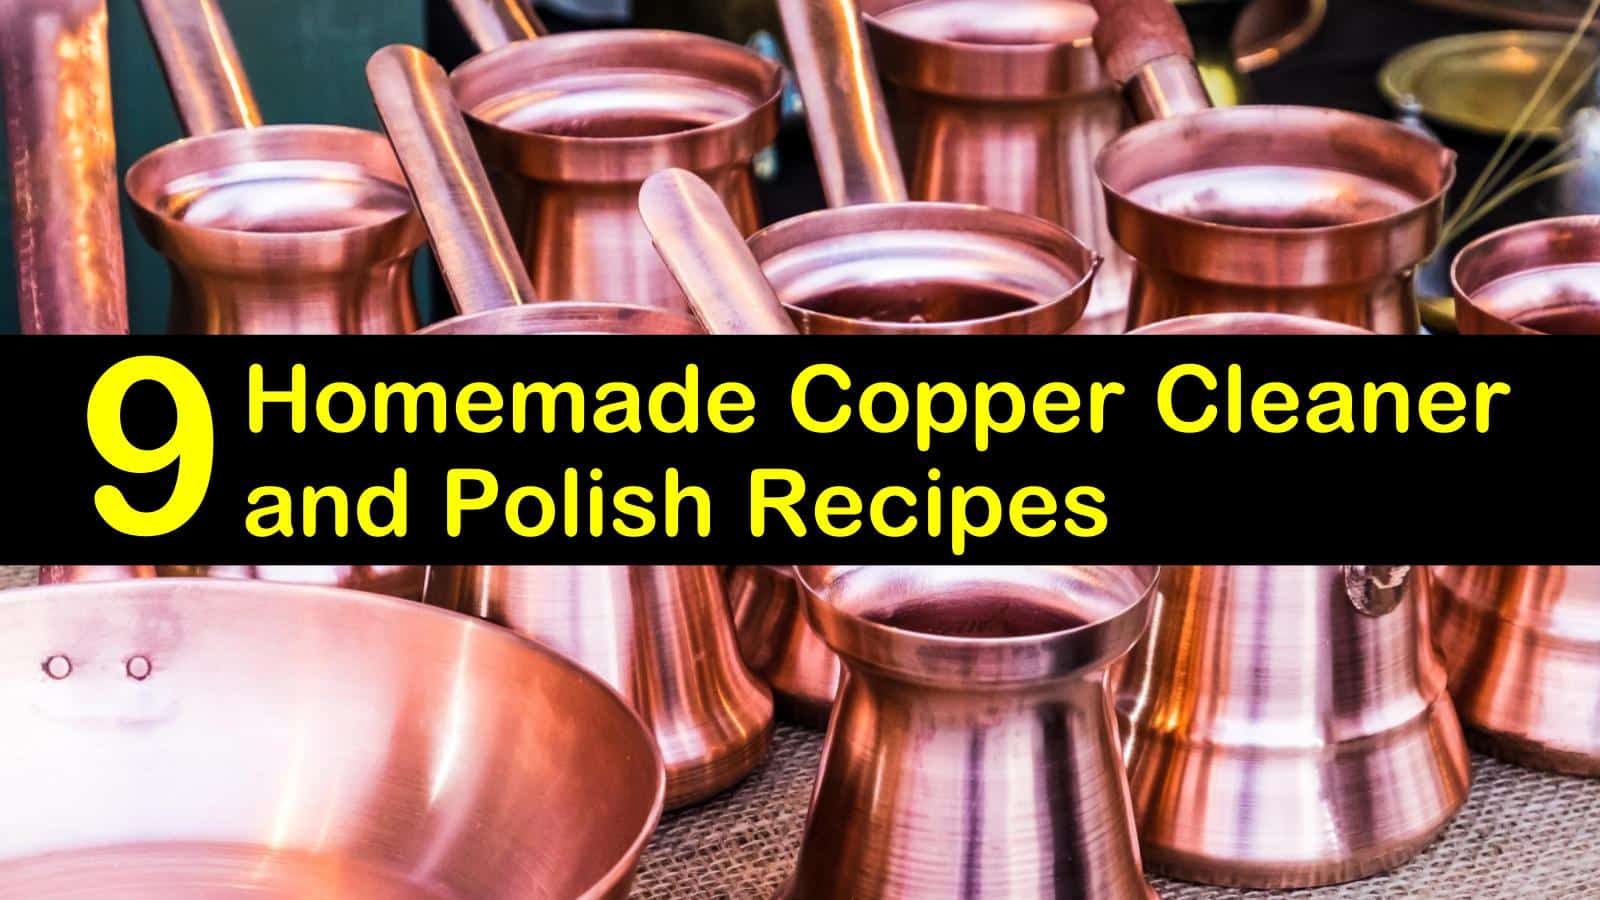 homemade copper cleaner polish titilimg